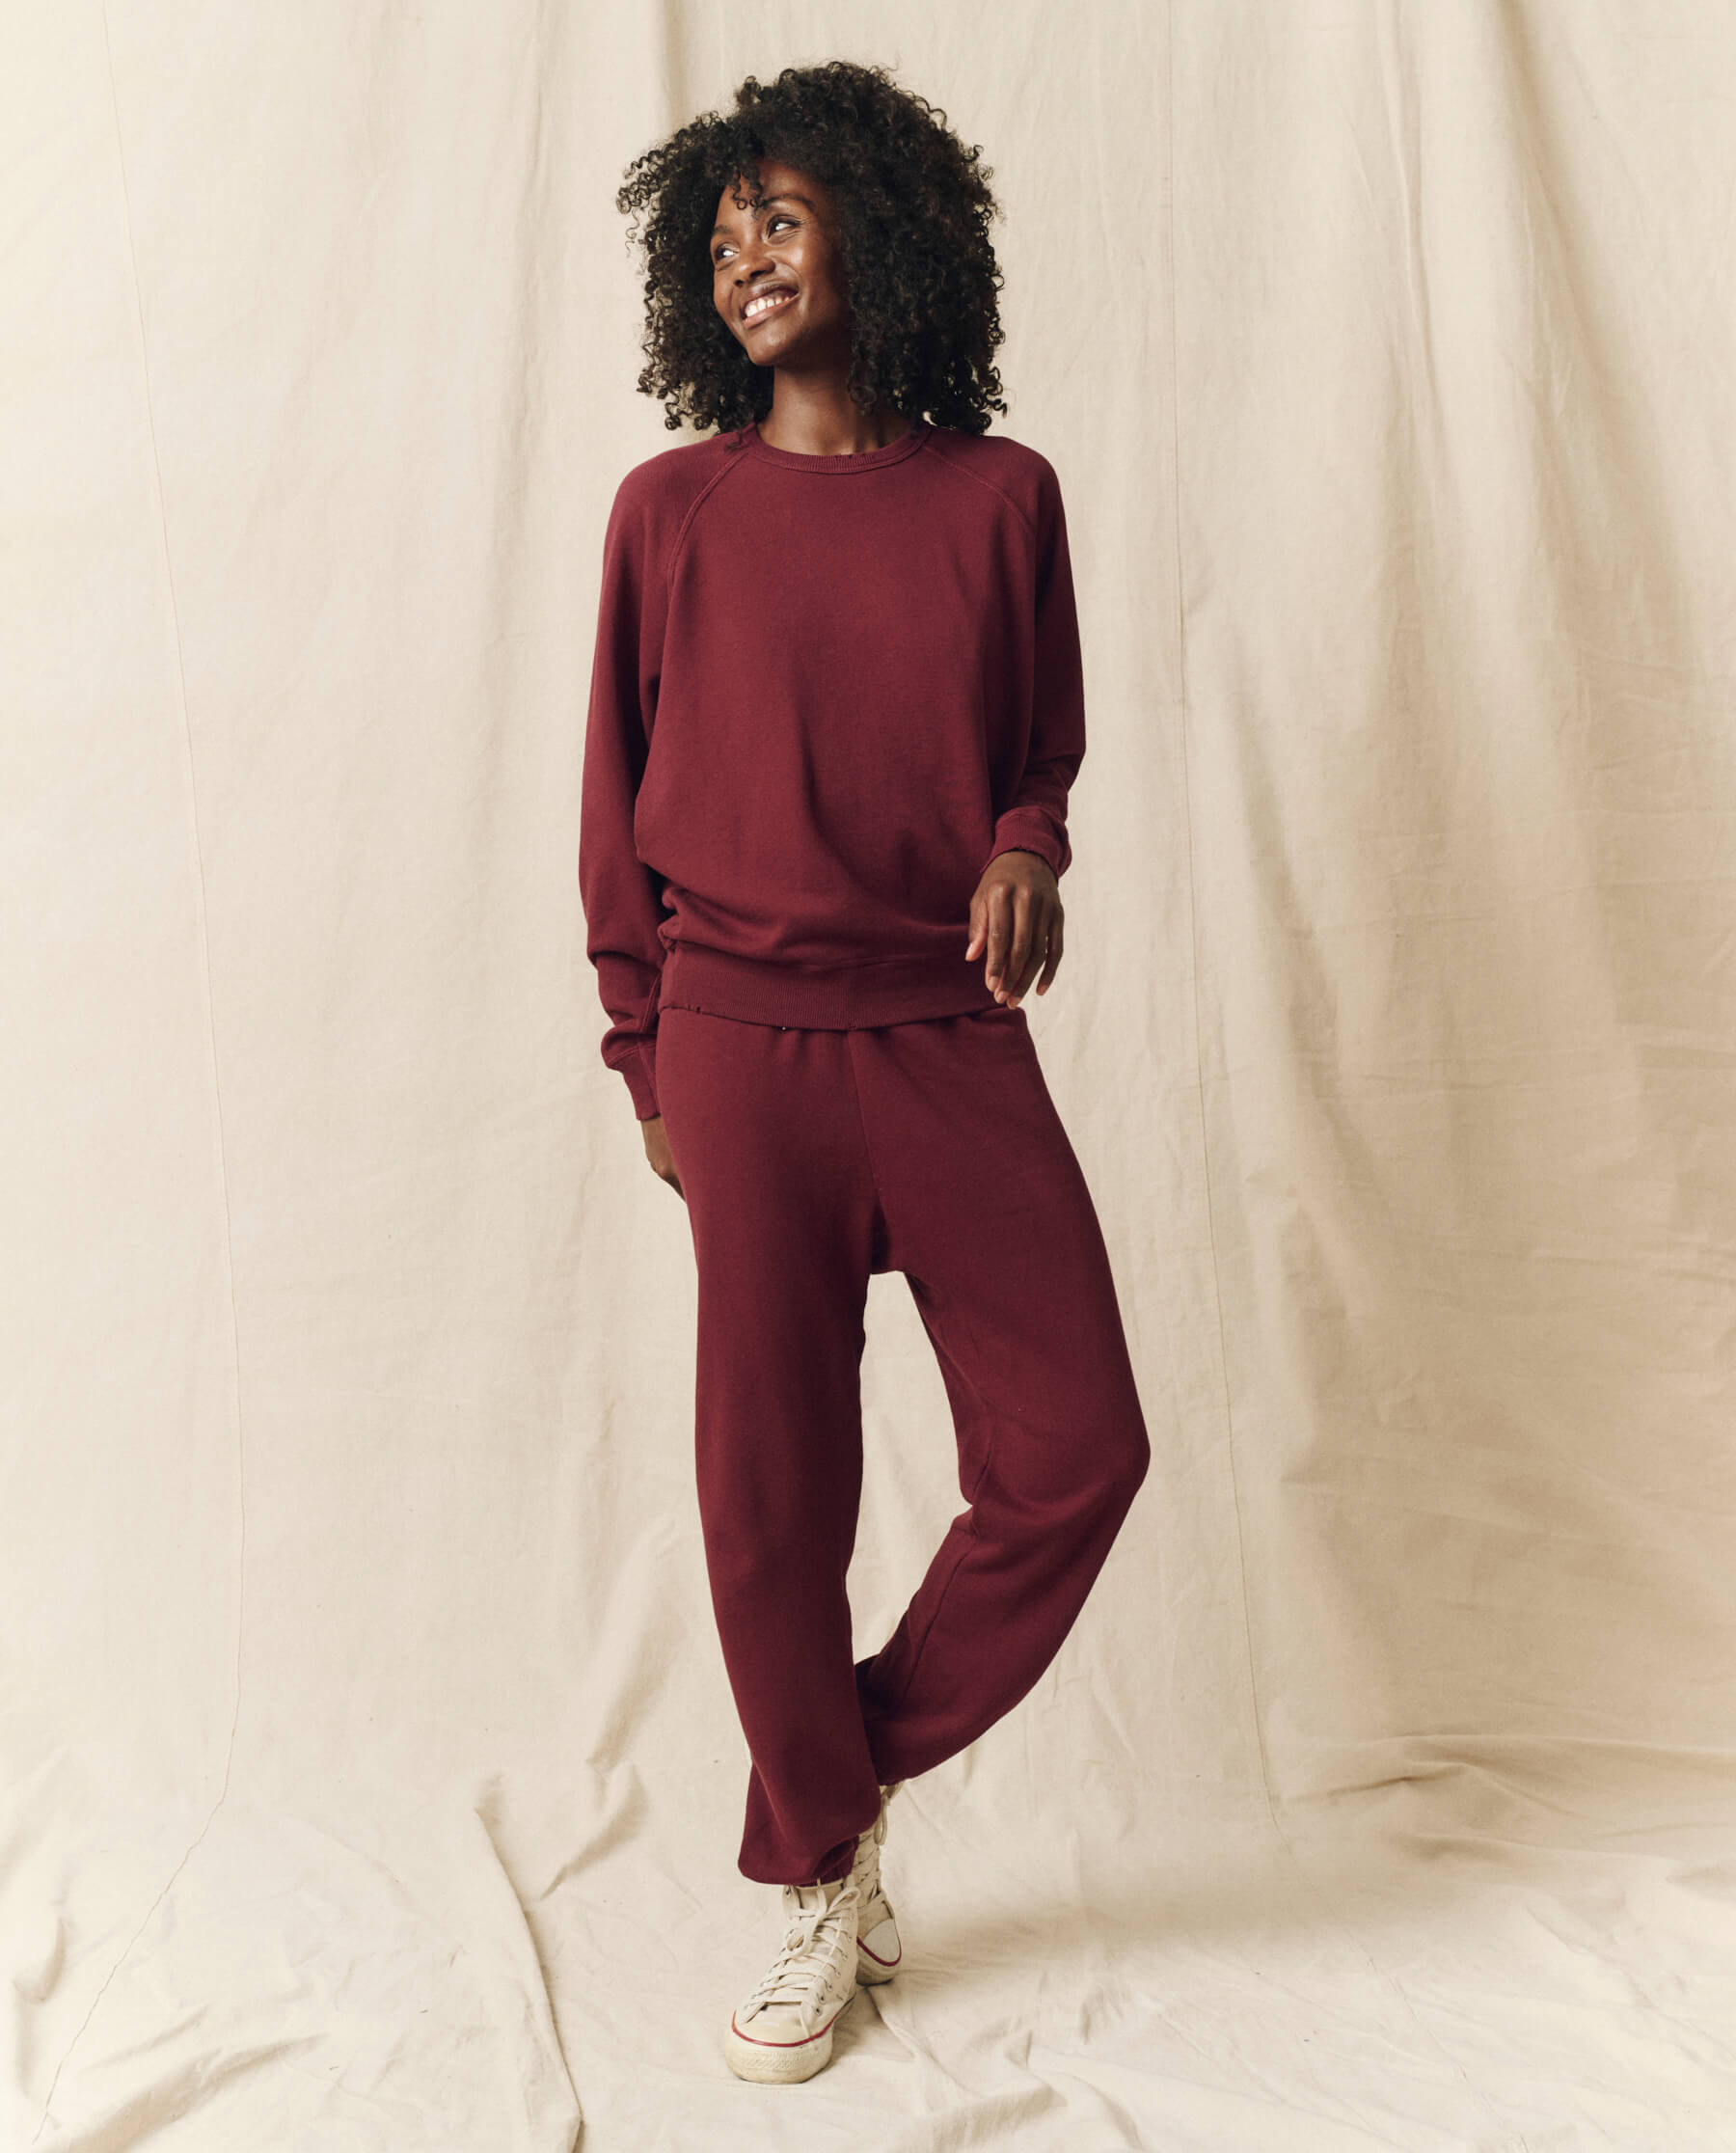 The Stadium Sweatpant. Solid -- Mulled Wine SWEATPANTS THE GREAT. HOL 23 KNITS